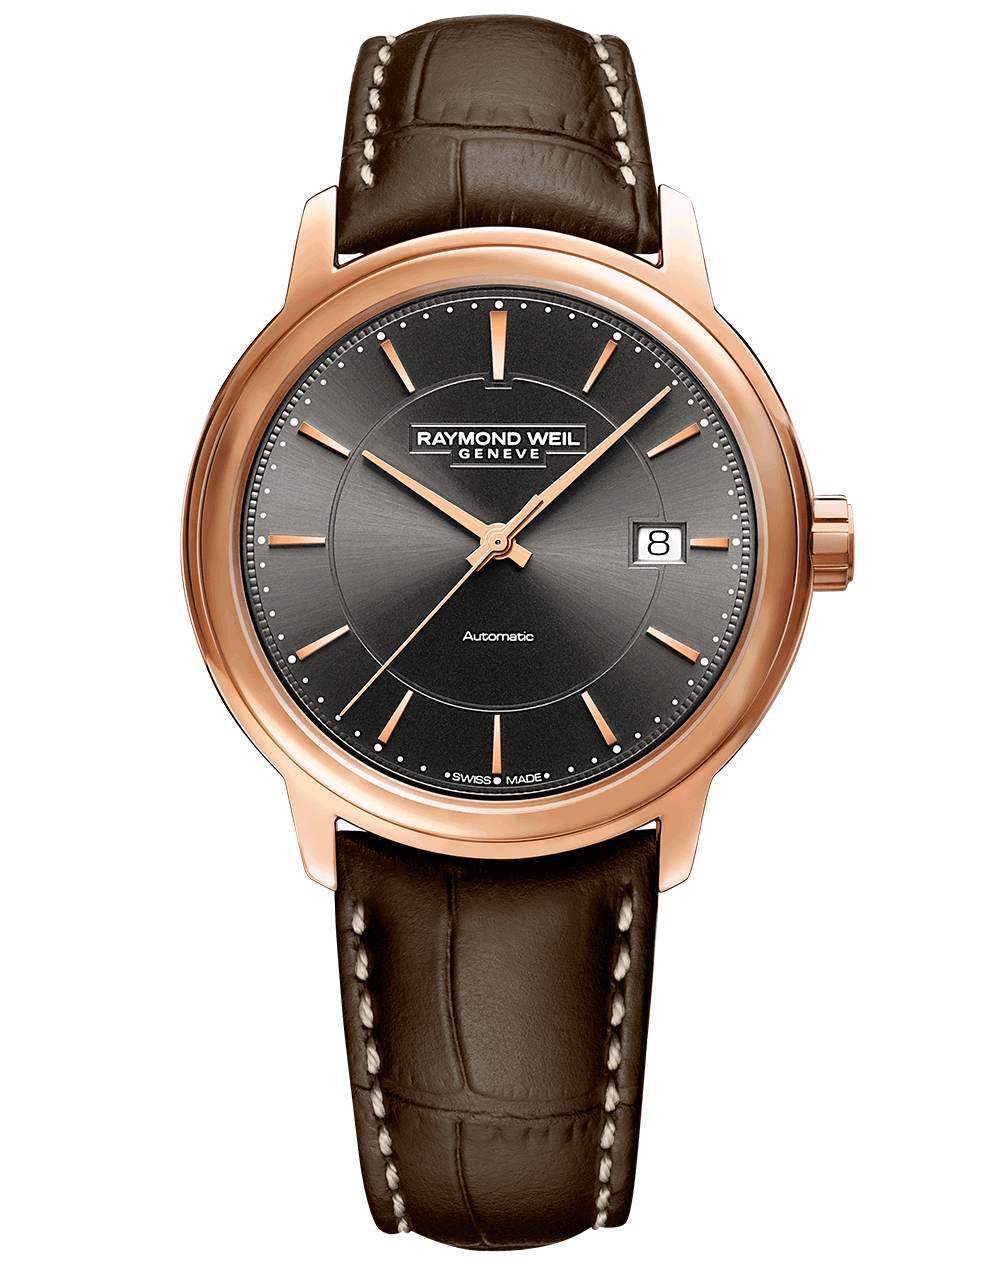 Maestro Men’s Rose Gold Automatic Date Watch